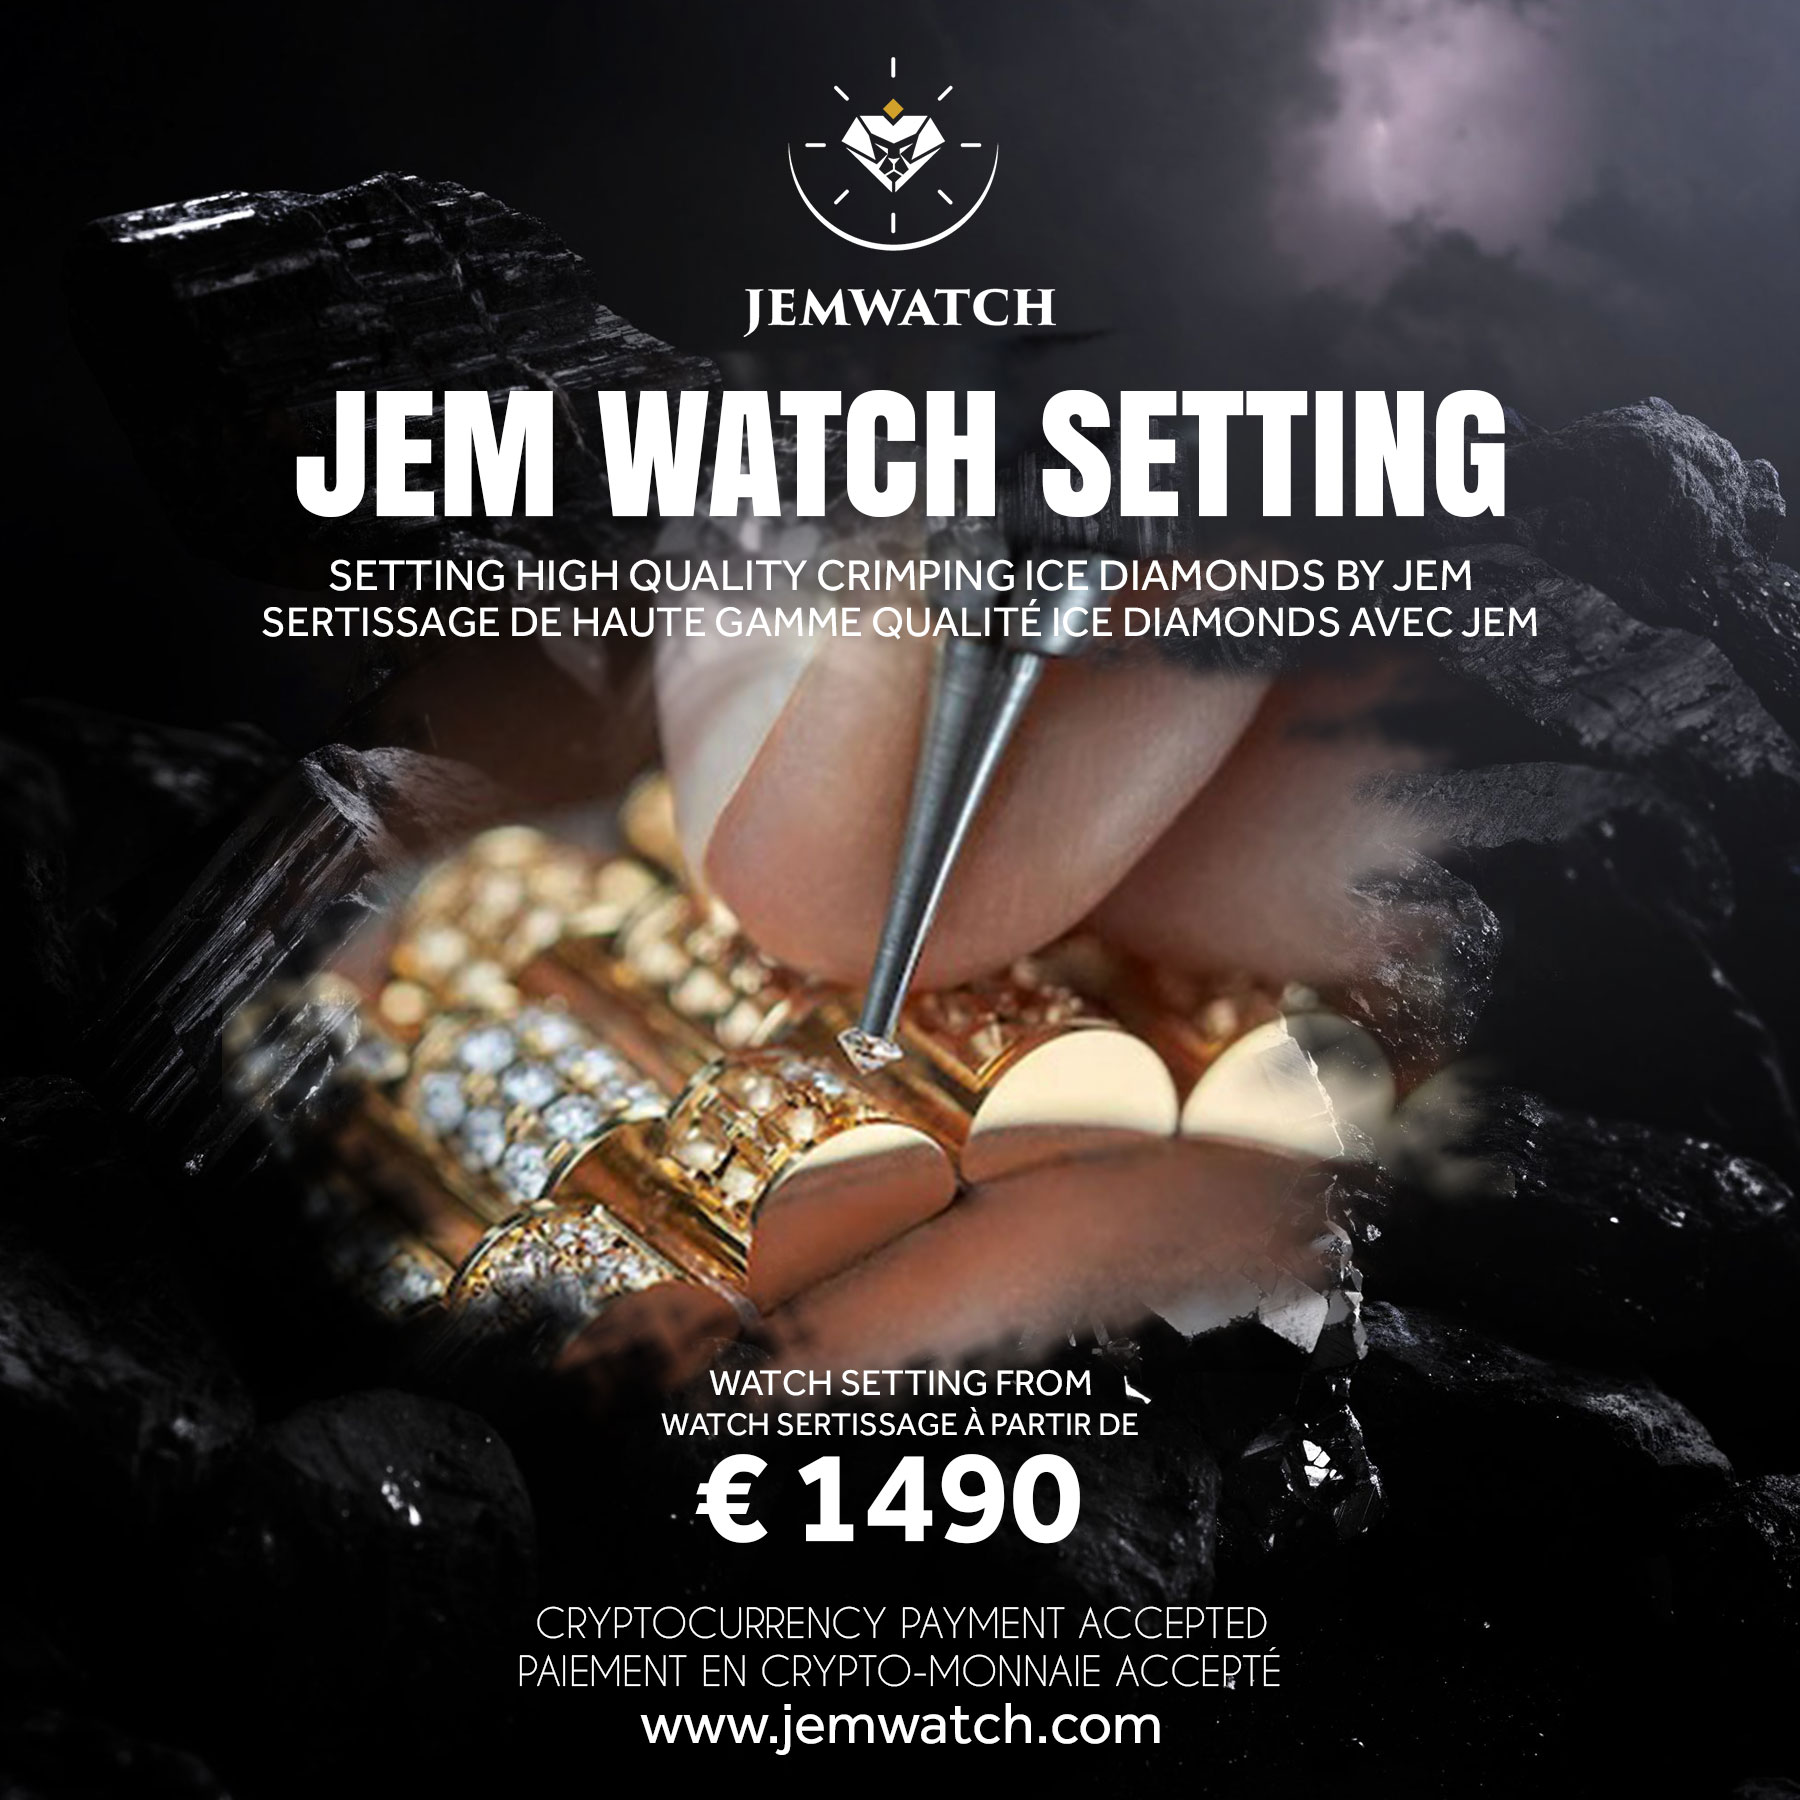 jemwatch: Women's watch and man watch. Location: france, belgique, London, United states